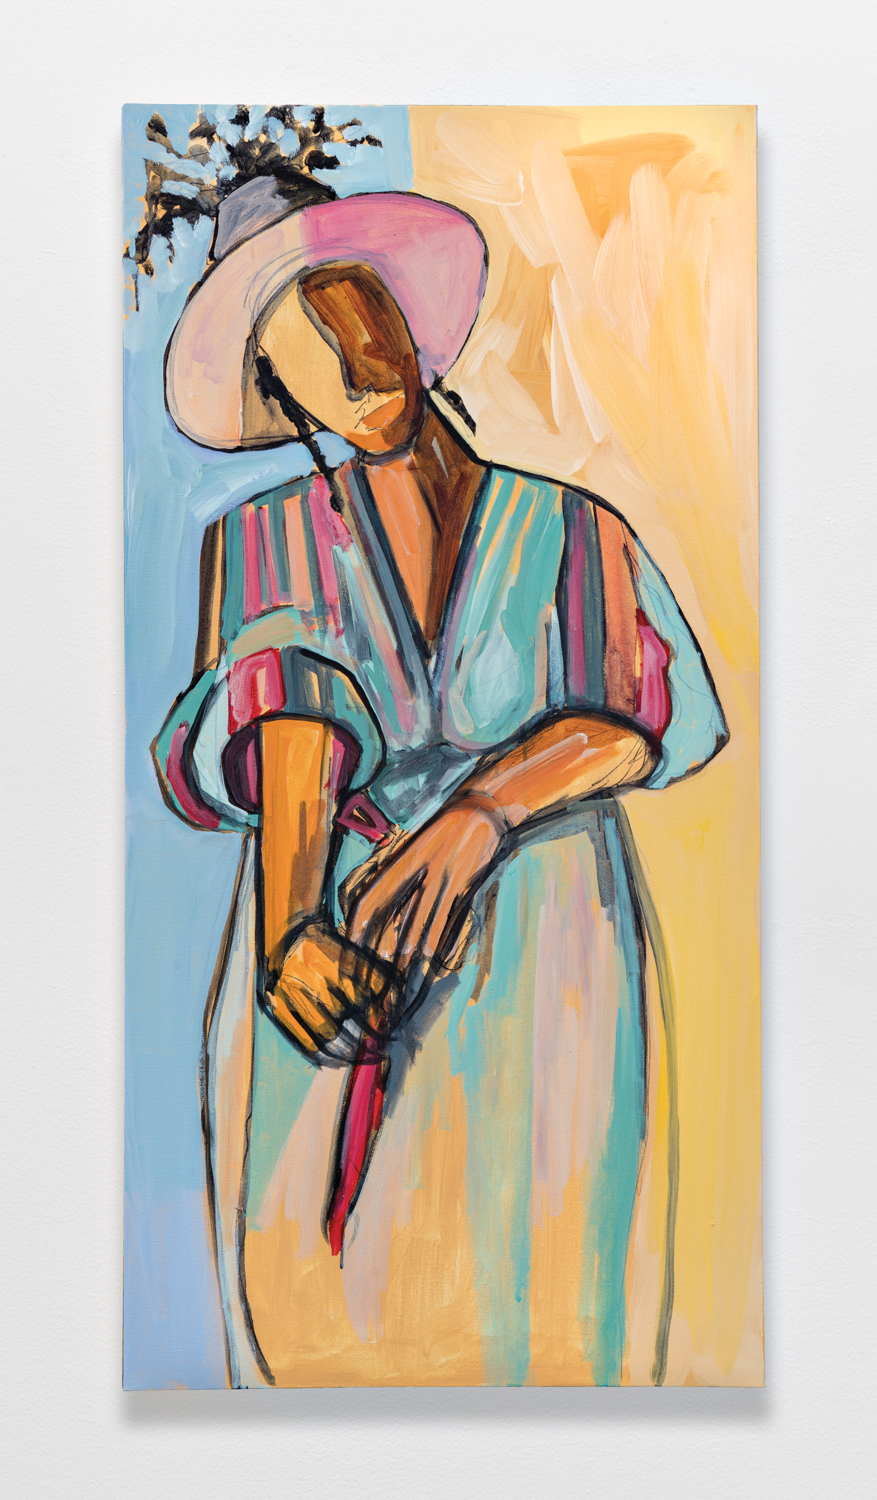 Portrait of a black woman with obscured facial features in colorful dress and hat on a blue and orange background.